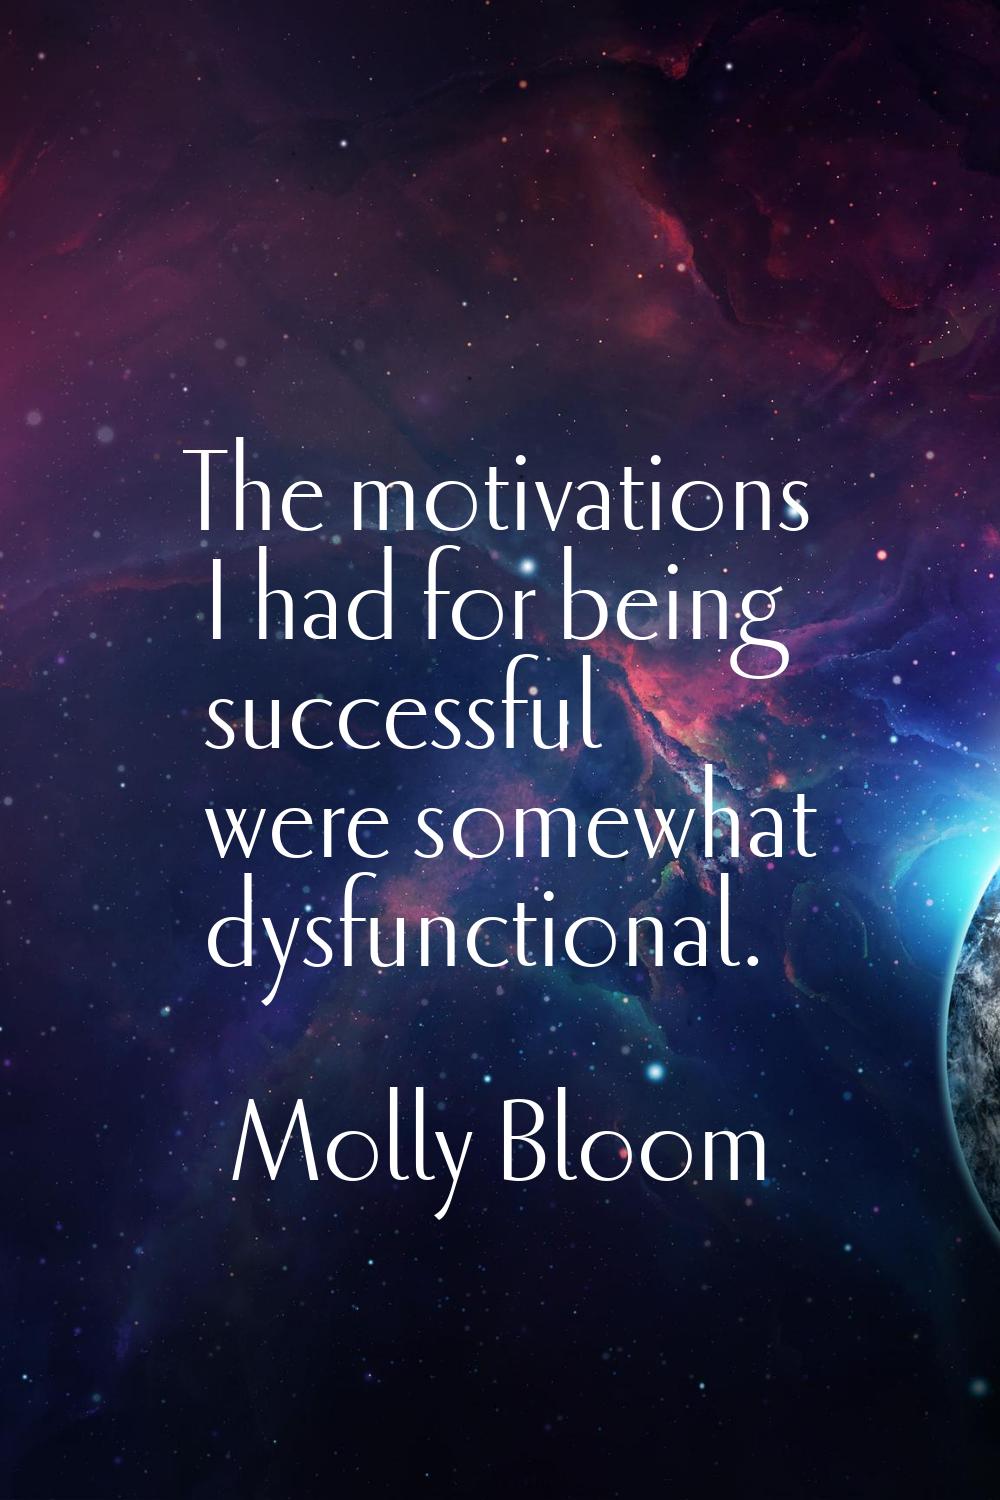 The motivations I had for being successful were somewhat dysfunctional.